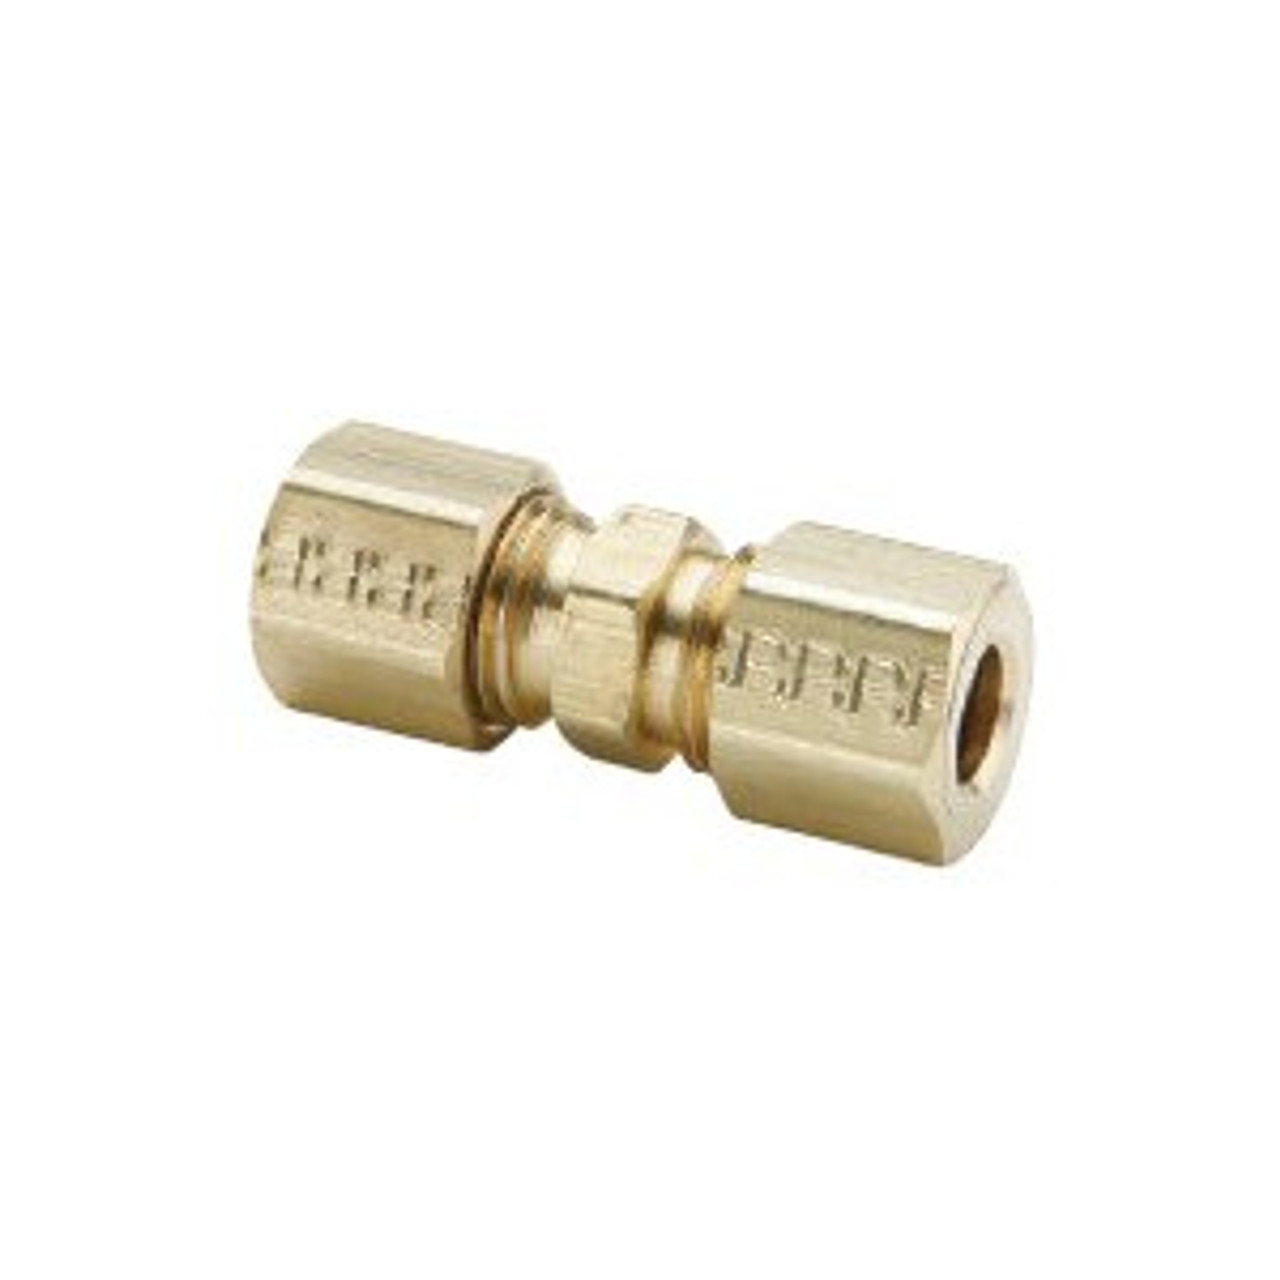 Compression Fittings Exporters, Union Compression Fittings